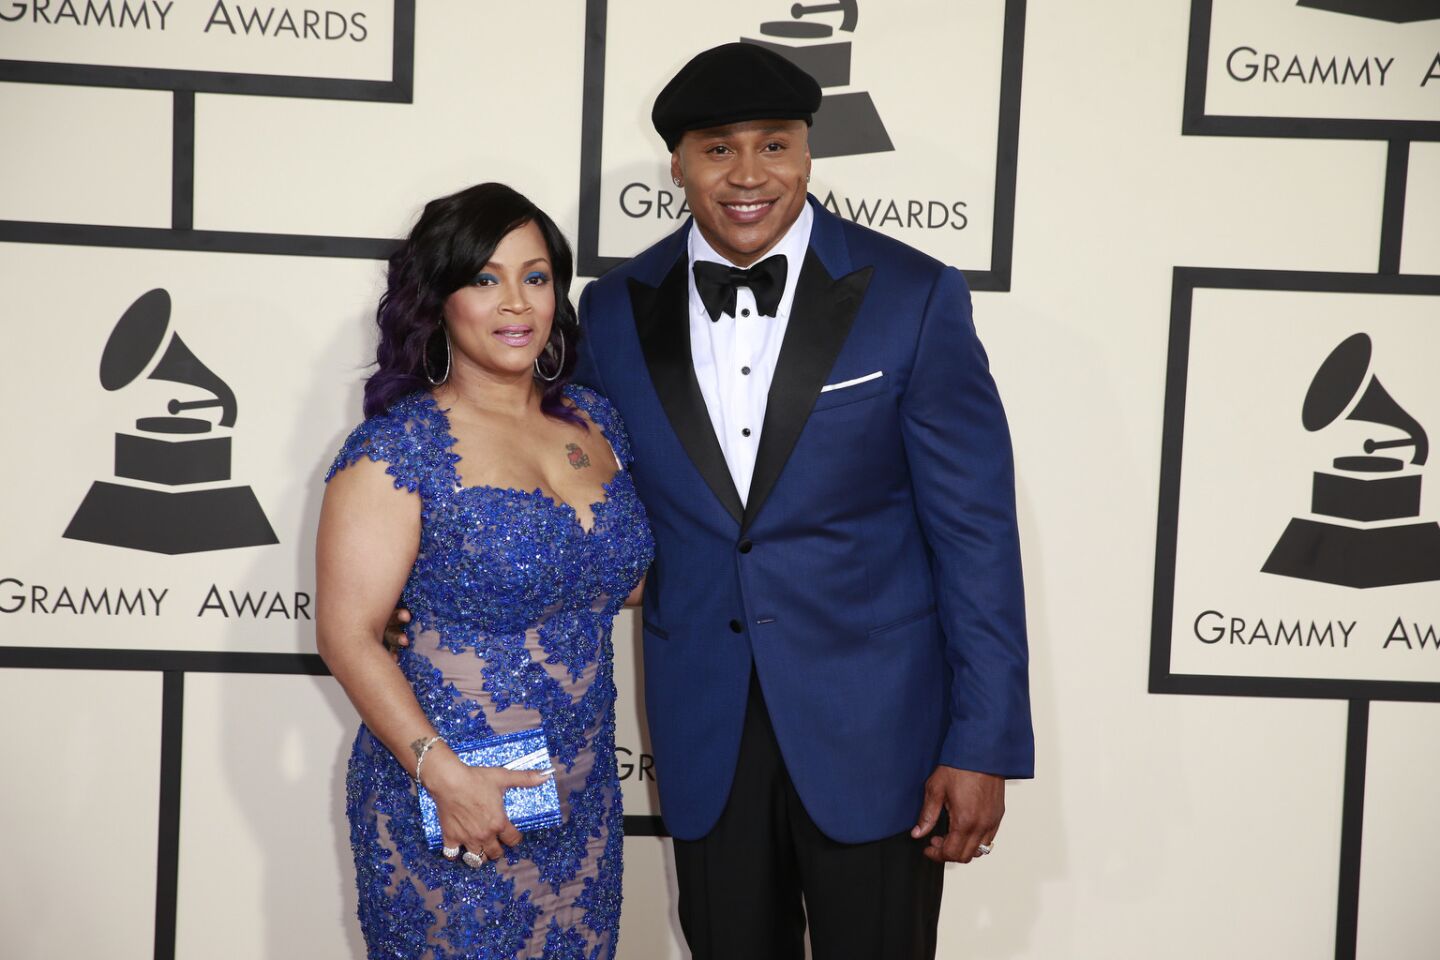 Grammy host LL Cool J and wife Simone Smith